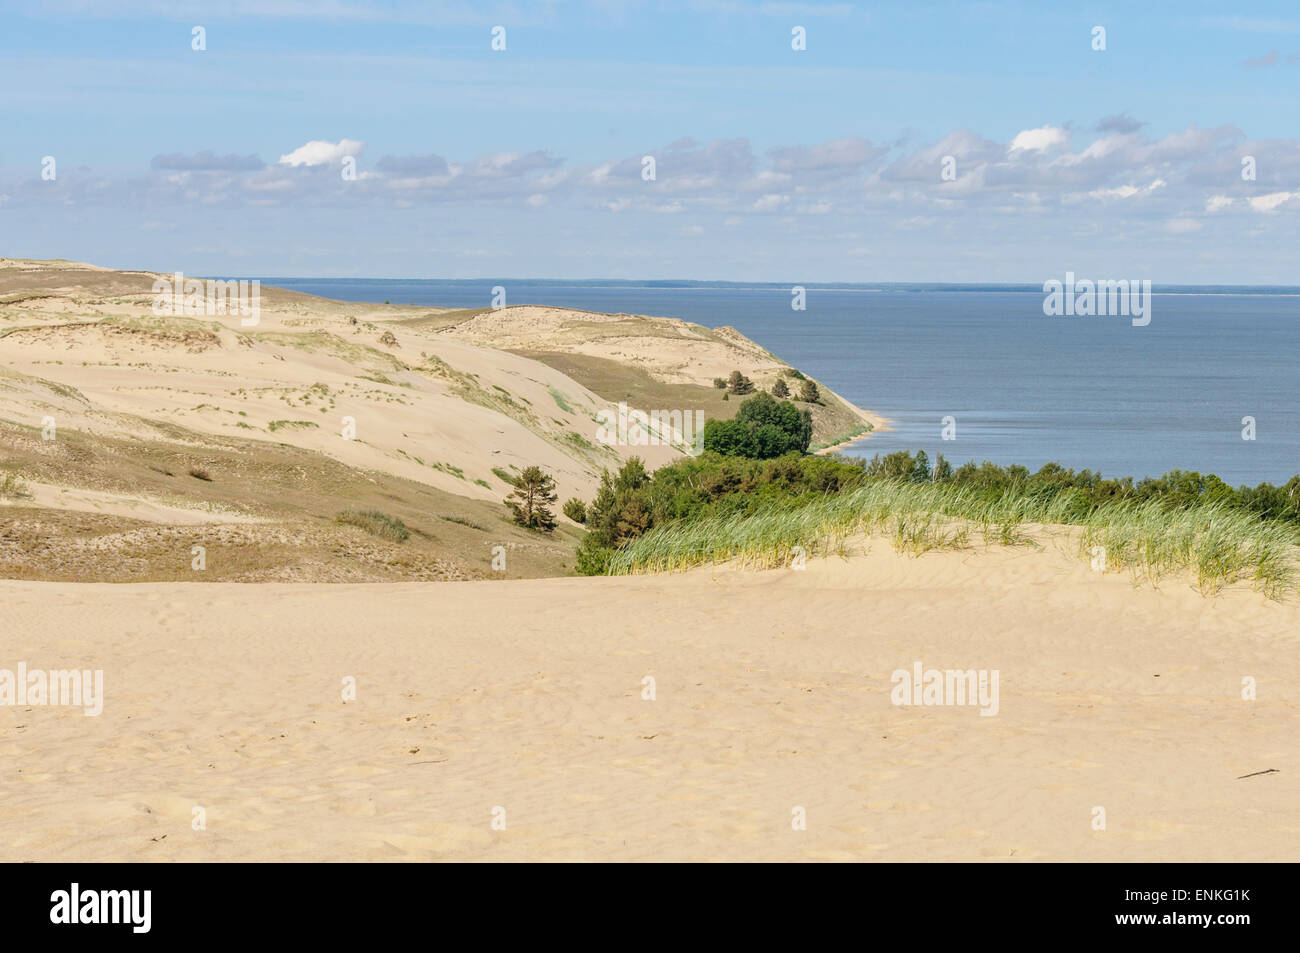 The so-called 'dead dunes' (or 'gray dunes') are one of the landmarks of the Curonian Spit in Lithuania, Europe Stock Photo